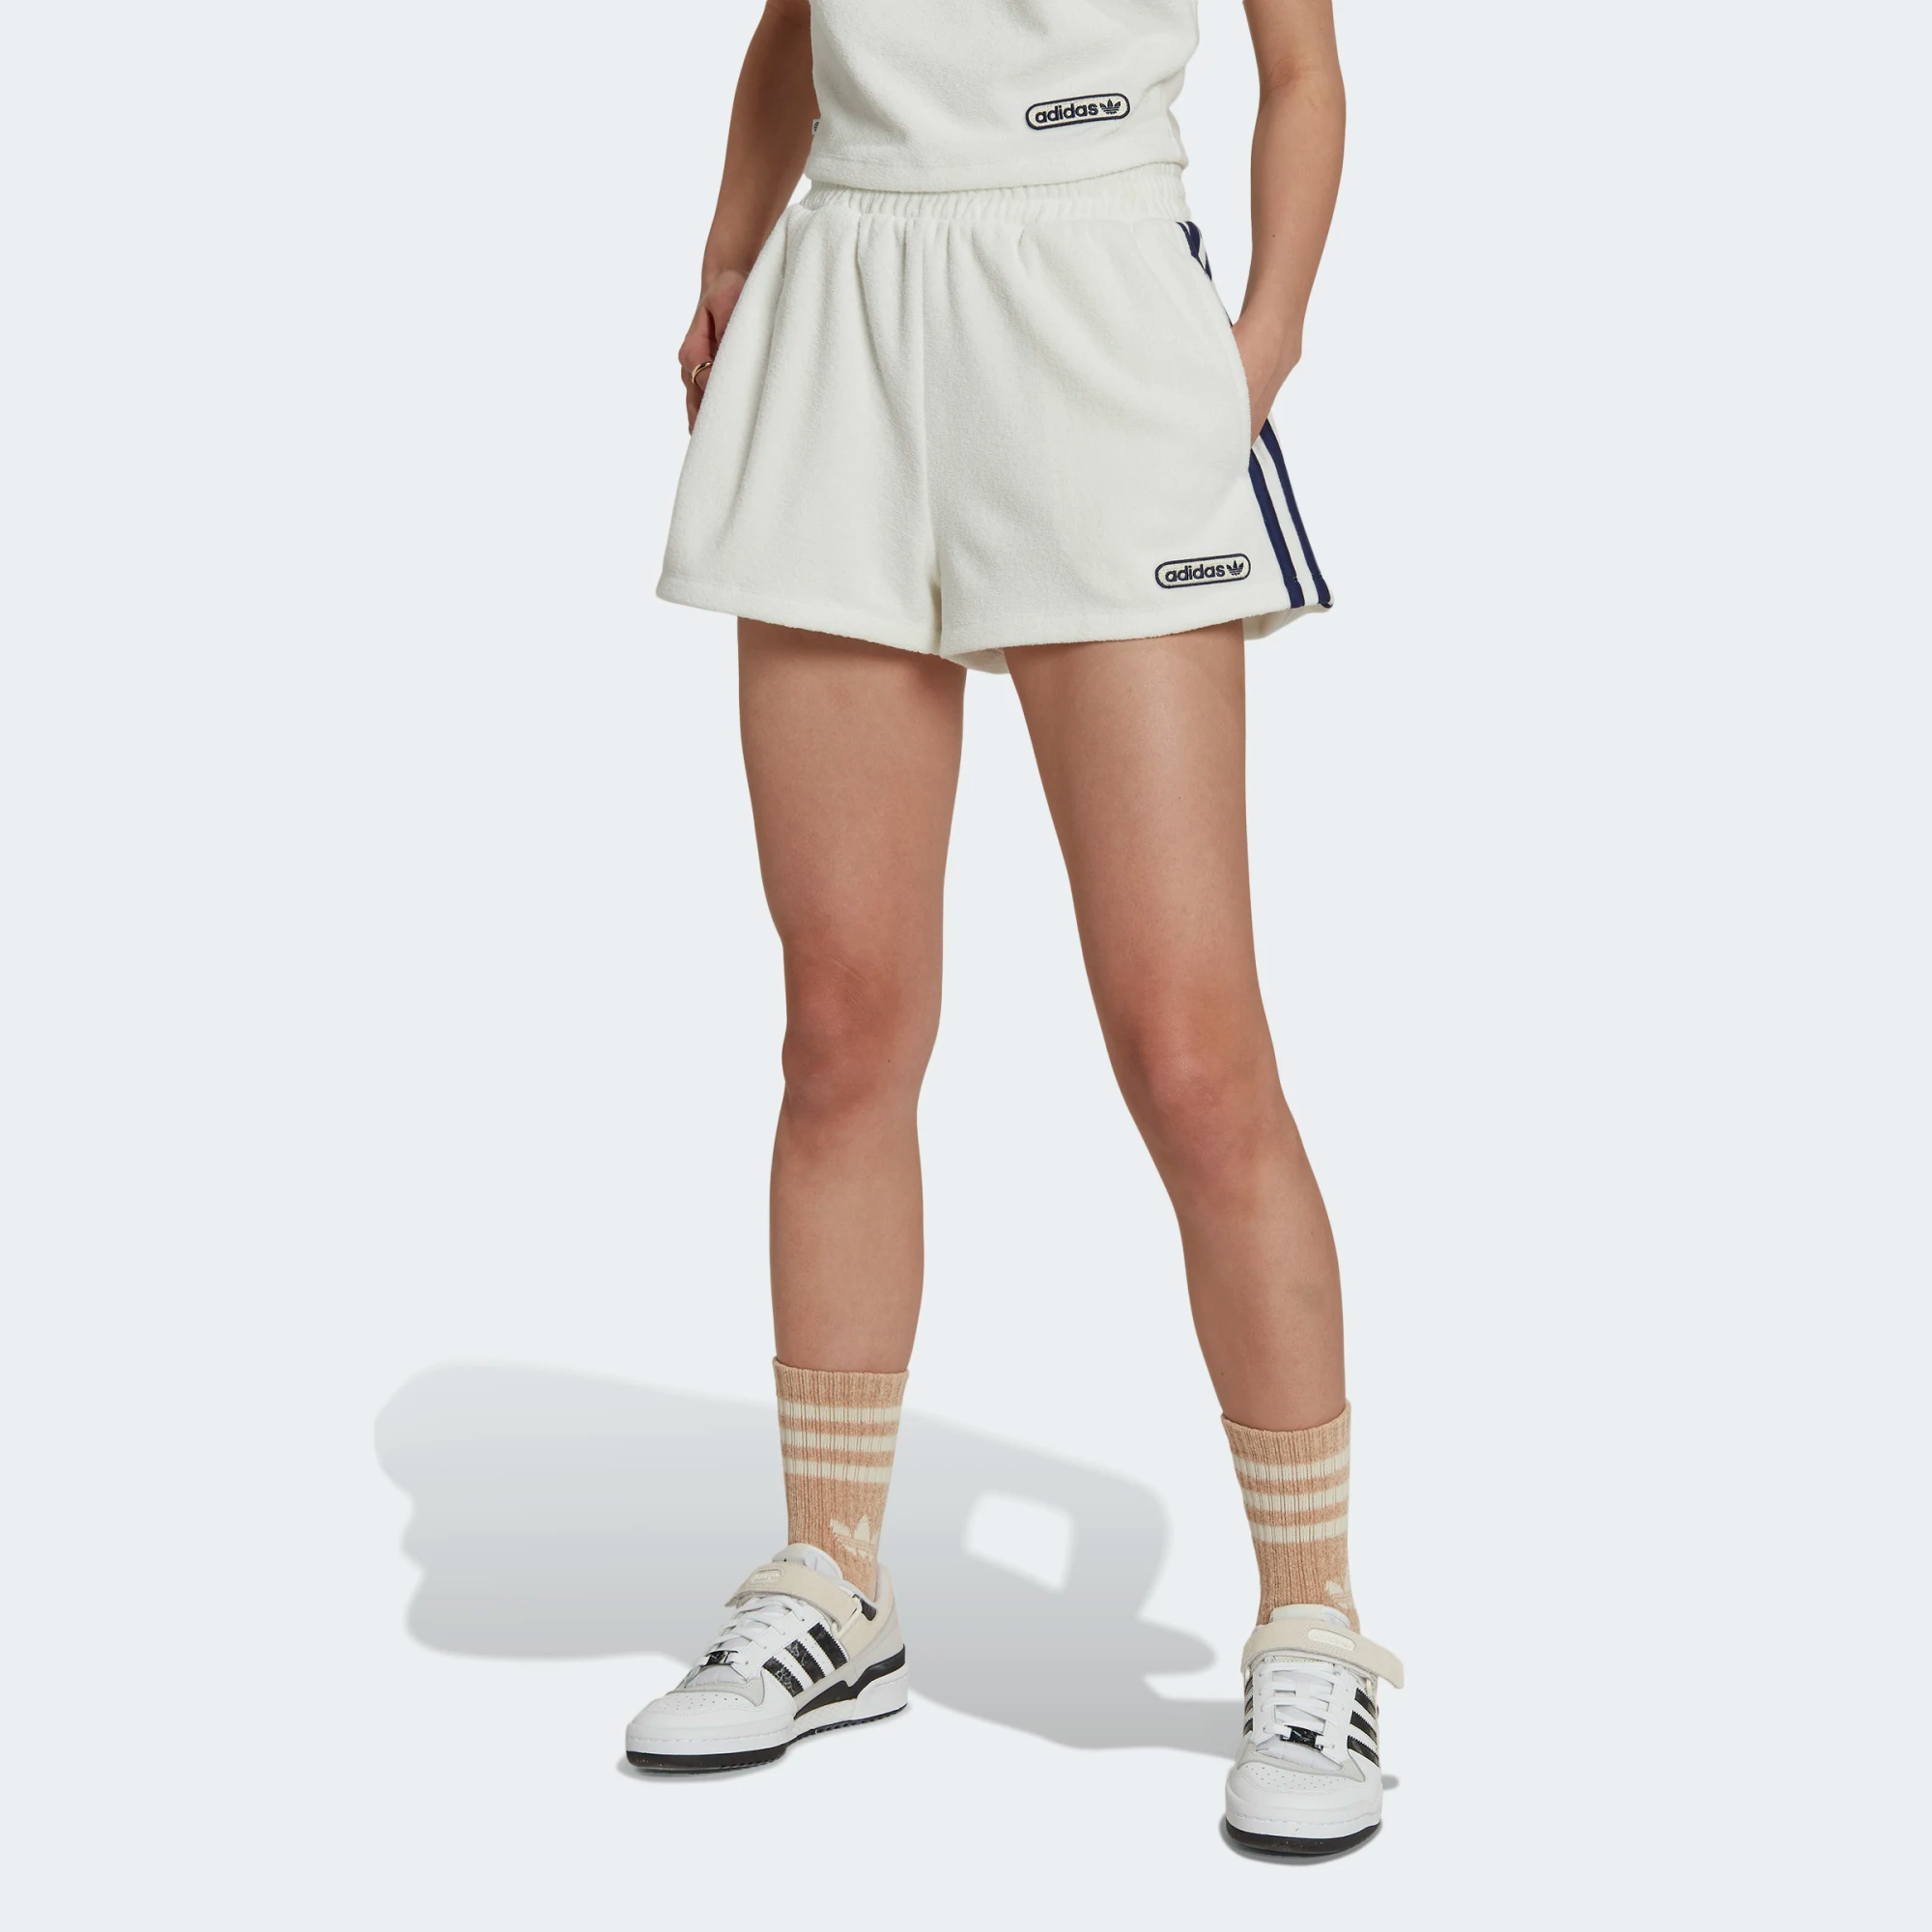 specifikation Tøj Rejse Adidas Women's High-Waist Towel Terry Shorts (Non Dyed) – Centre